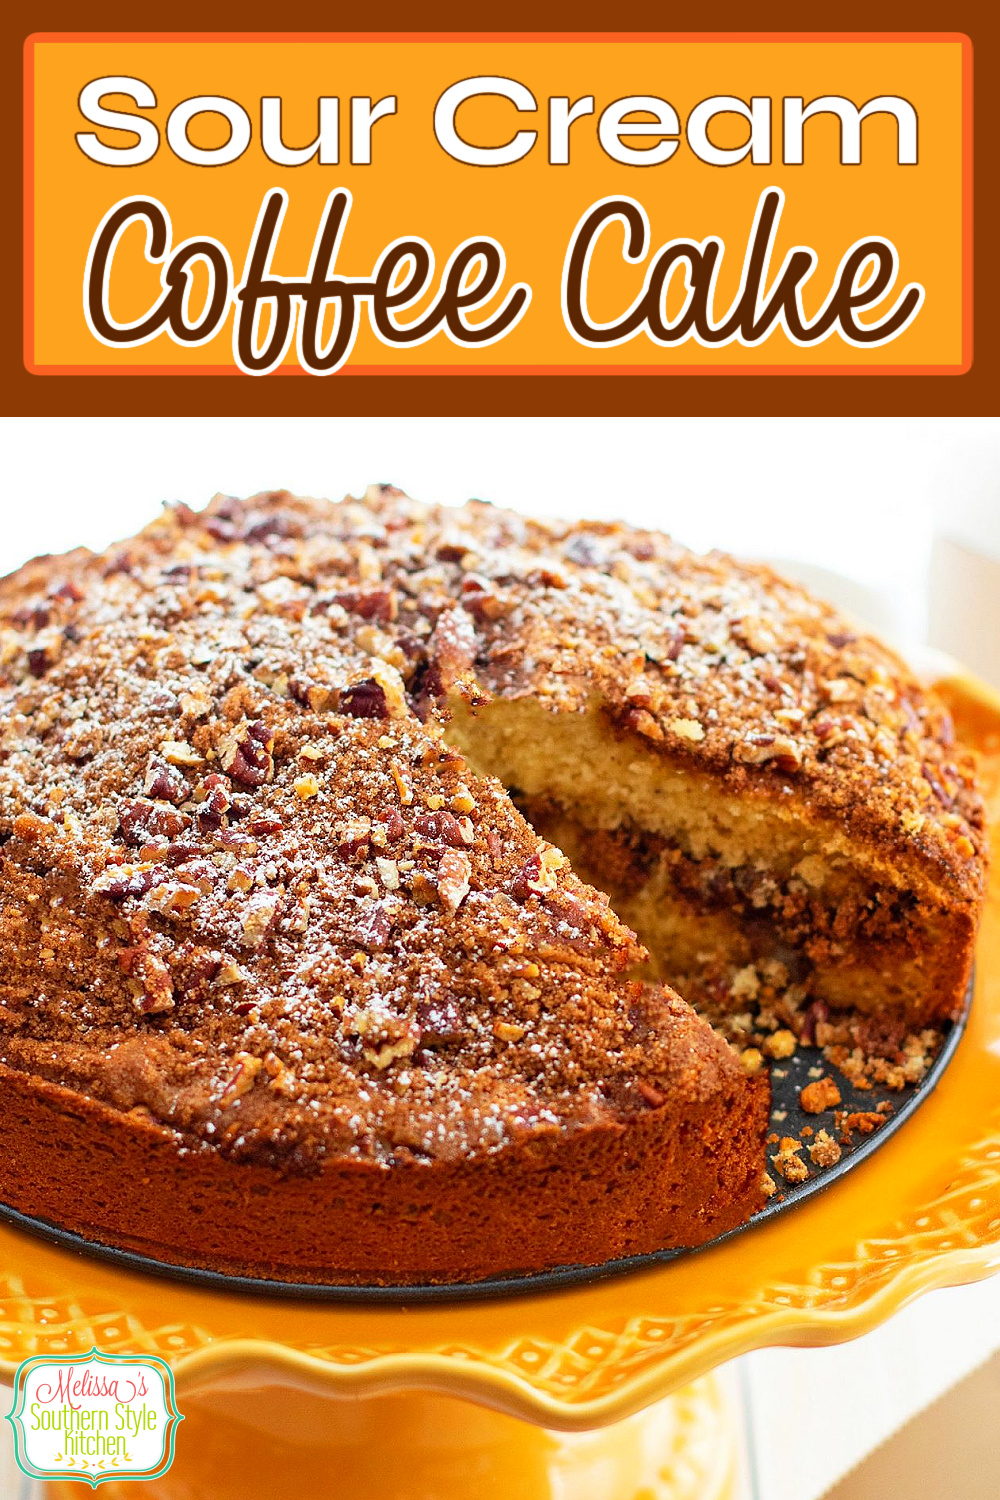 This Sour Cream Coffee Cake is the perfect excuse to have cake for breakfast! #coffeecake #sourcreamcoffeecake #cakerecipes #breakfast #brunch #southernfood #southernrecipes #desserts #dessertfoodrecipes via @melissasssk